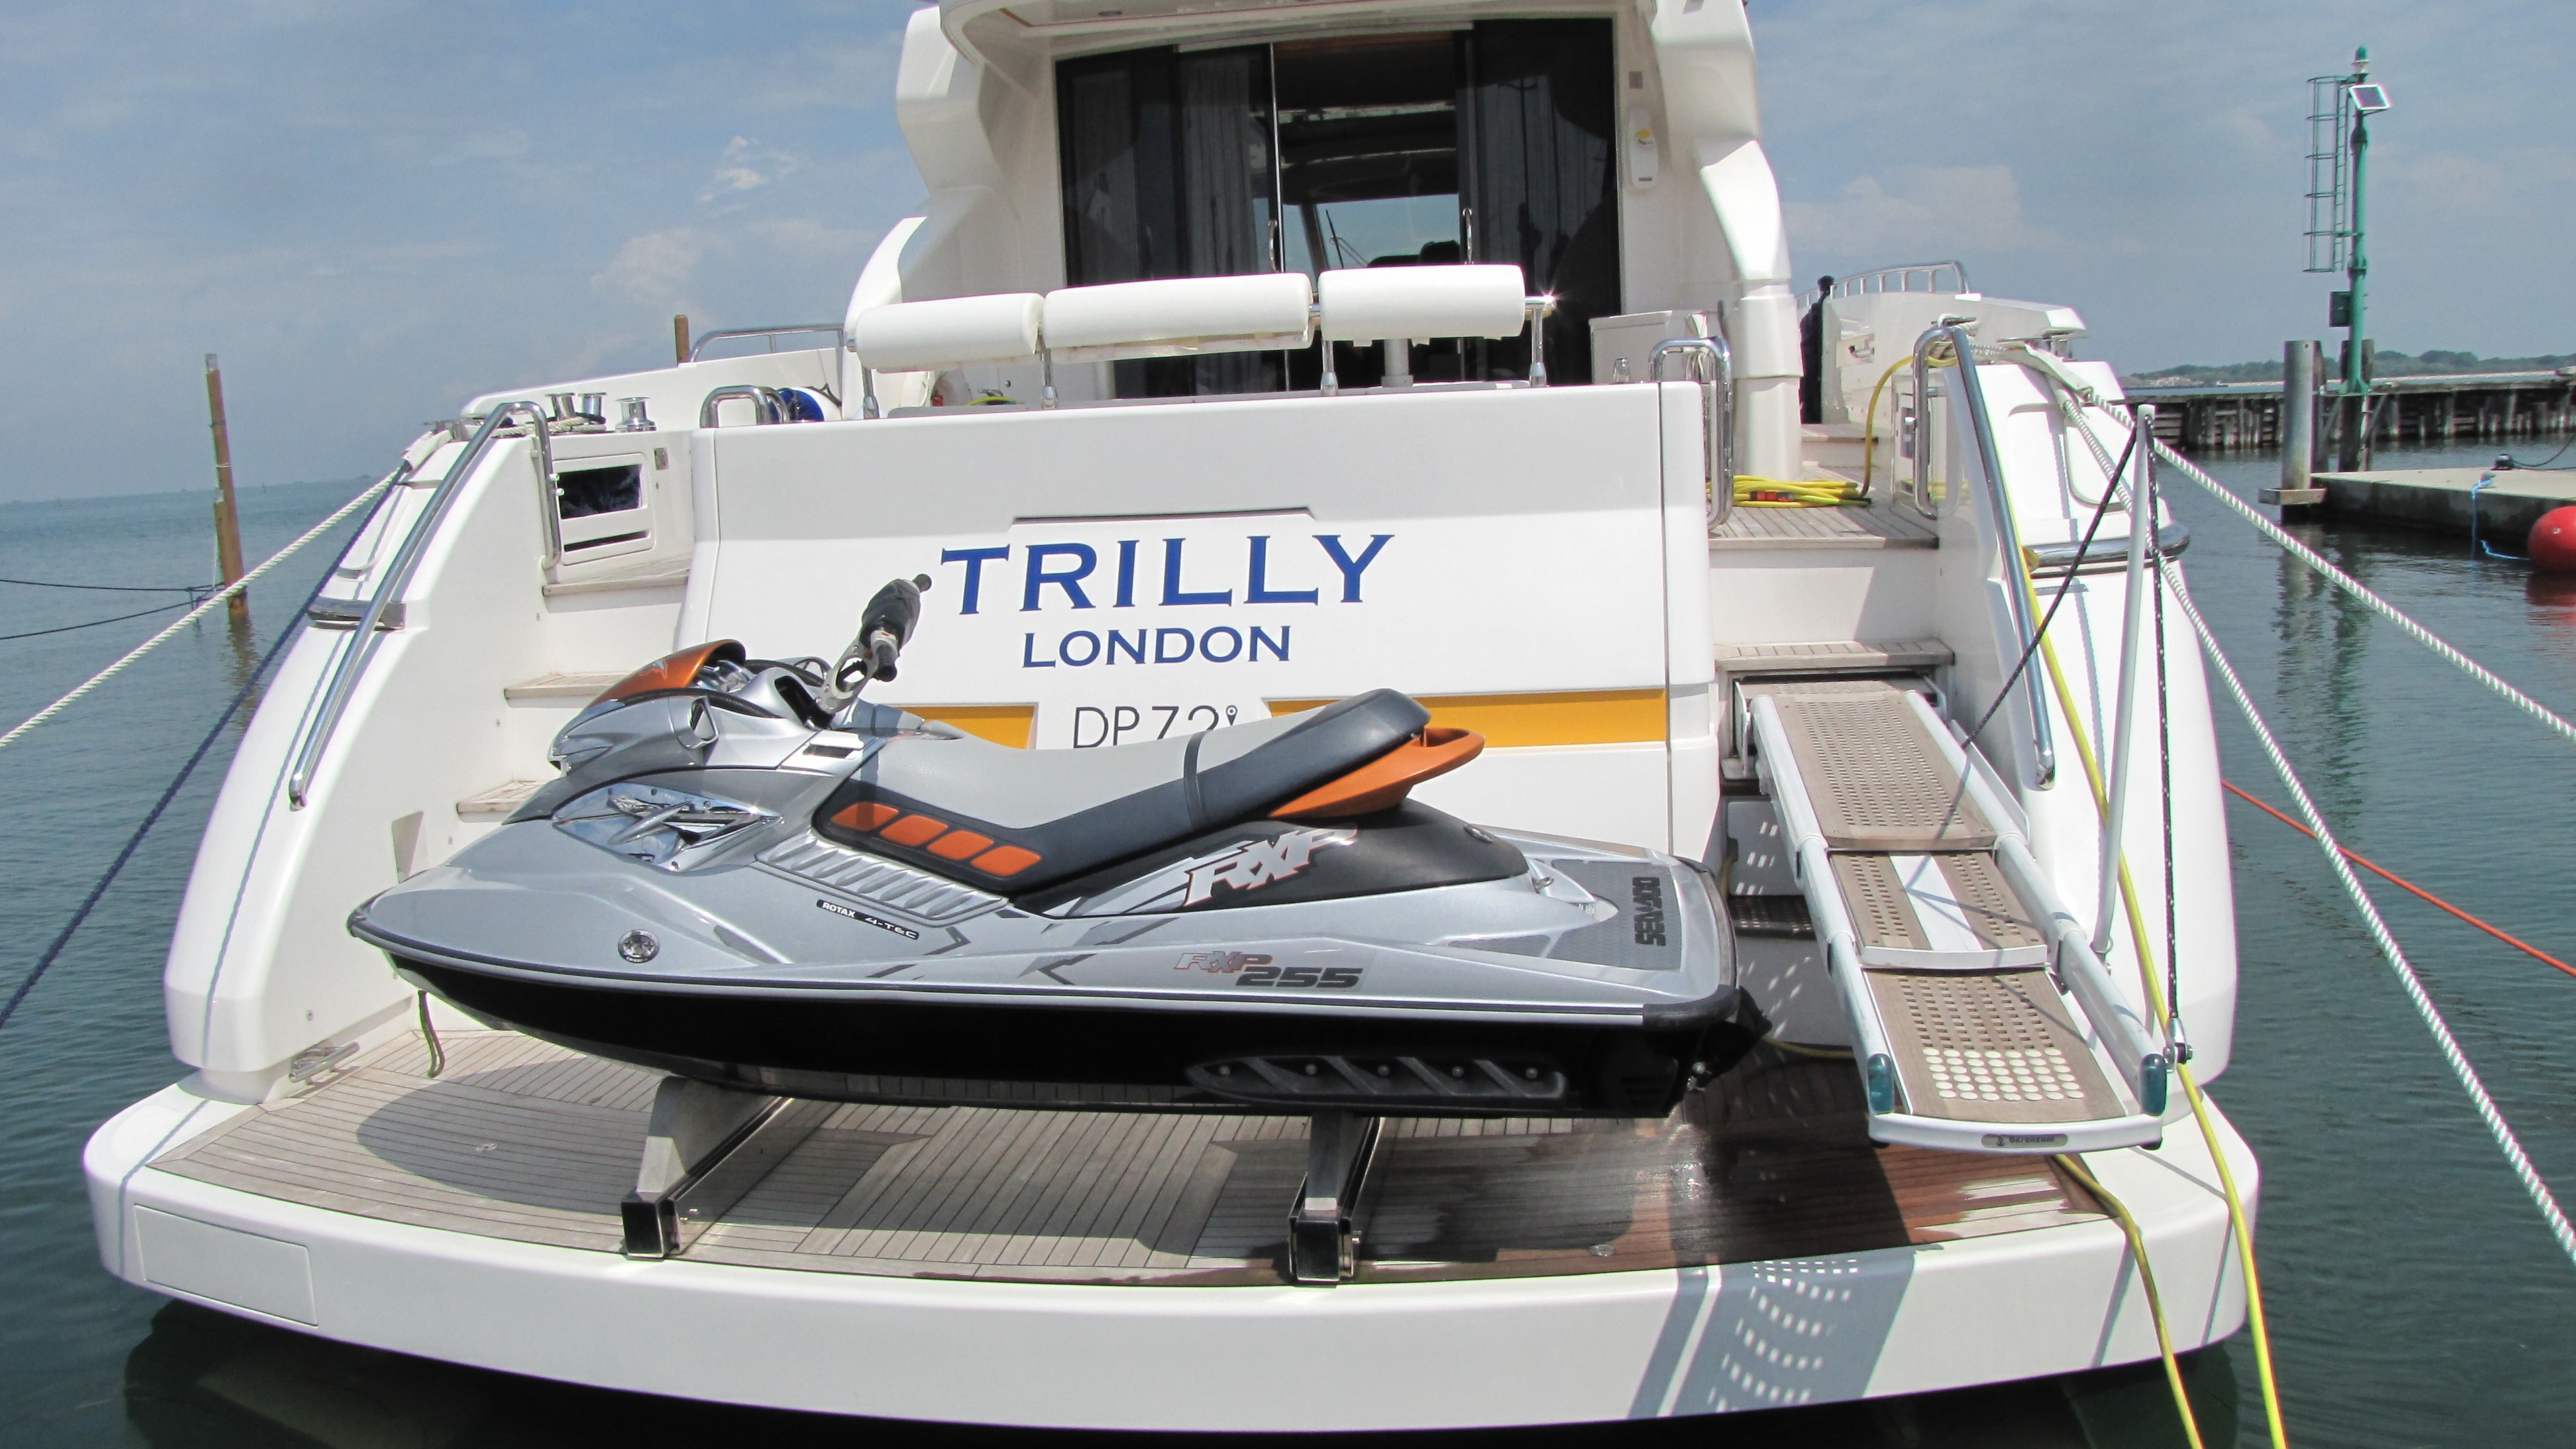 The 22m Yacht TRILLY